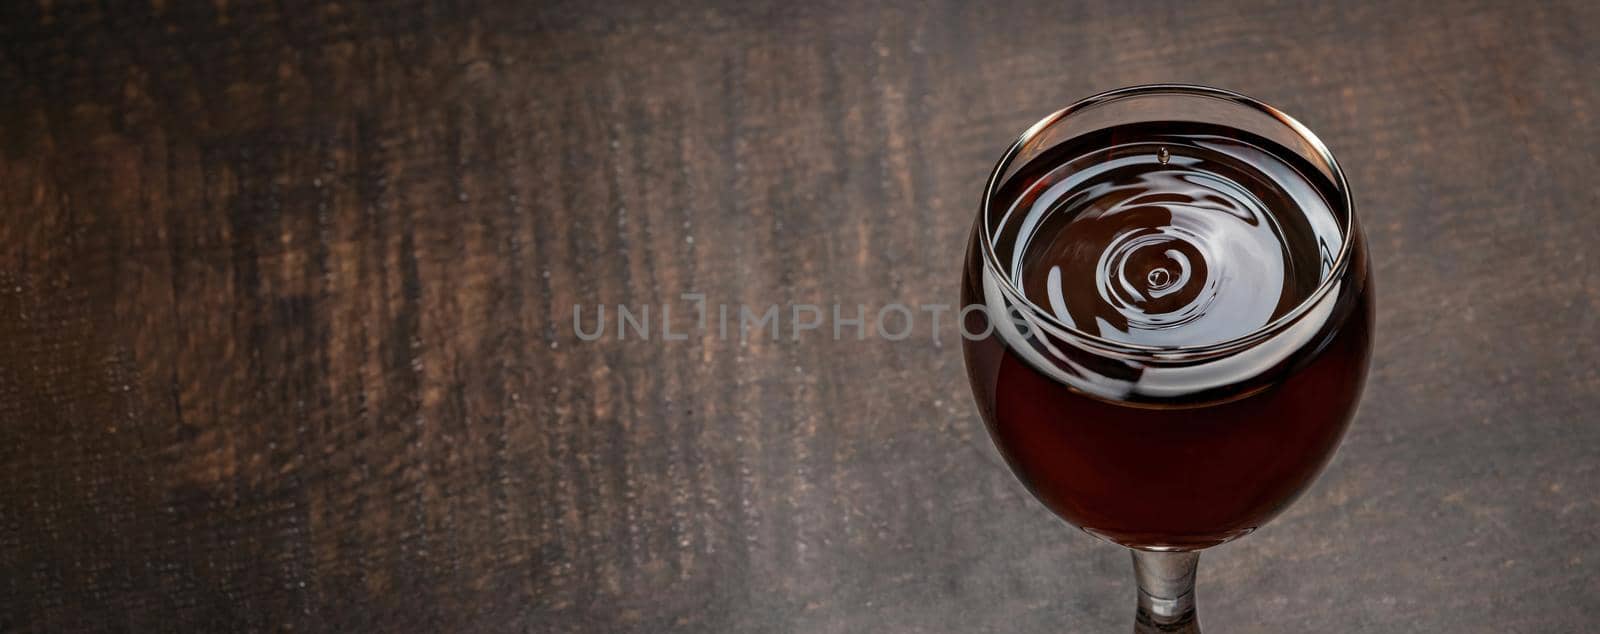 Drops of wine and waves forming in a glass full of red wine standing on a wooden table